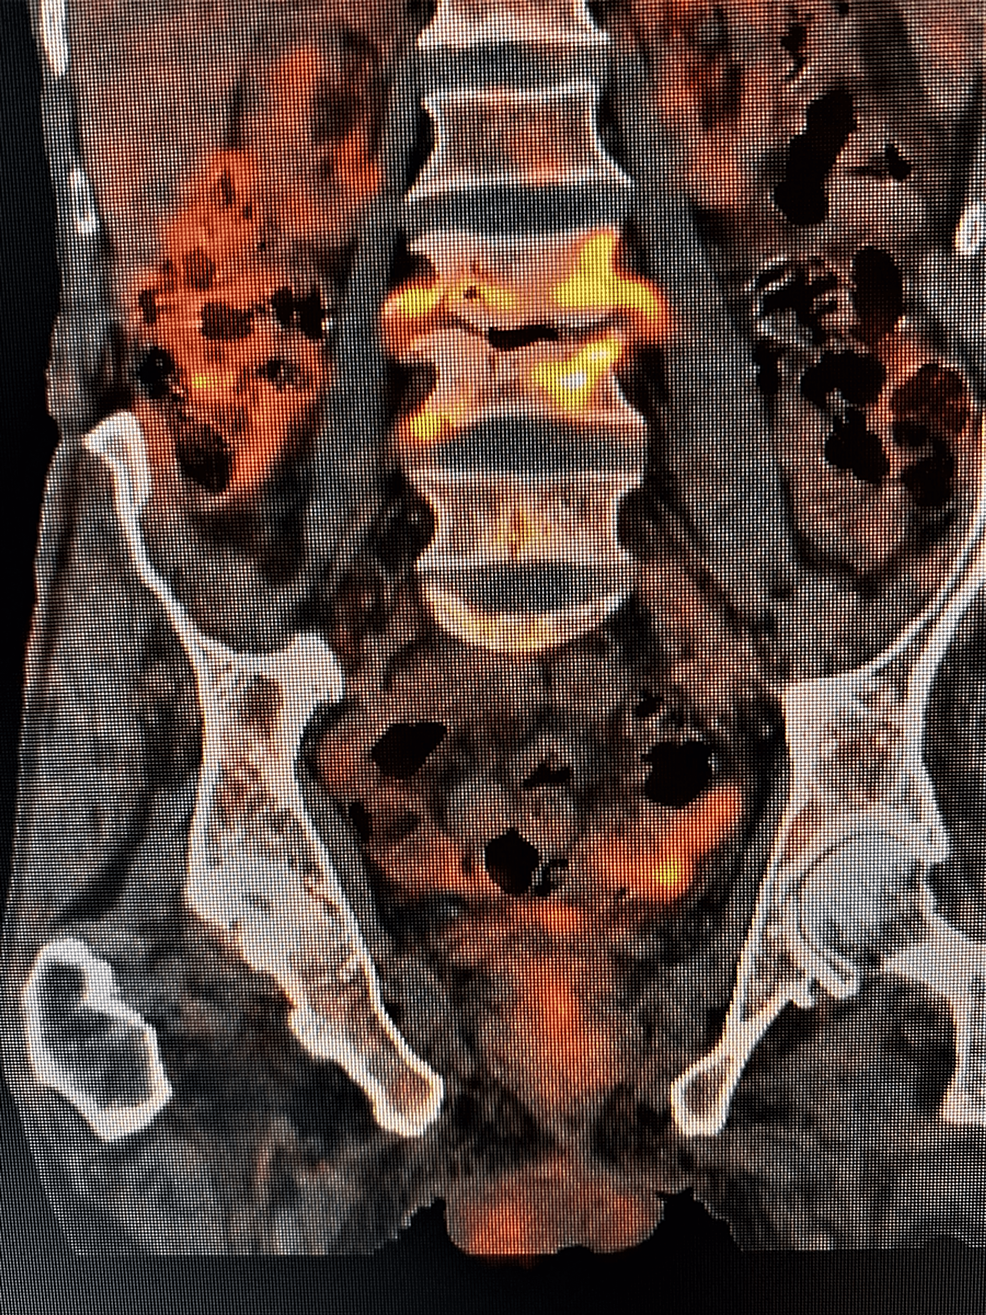 FDG-PET/CT-of-the-same-patient-as-above-after-six-months-showing-a-decrease-in-FDG-uptake-in-L3---L4-intervertebral-disc-(SUVmax-=-4.1)